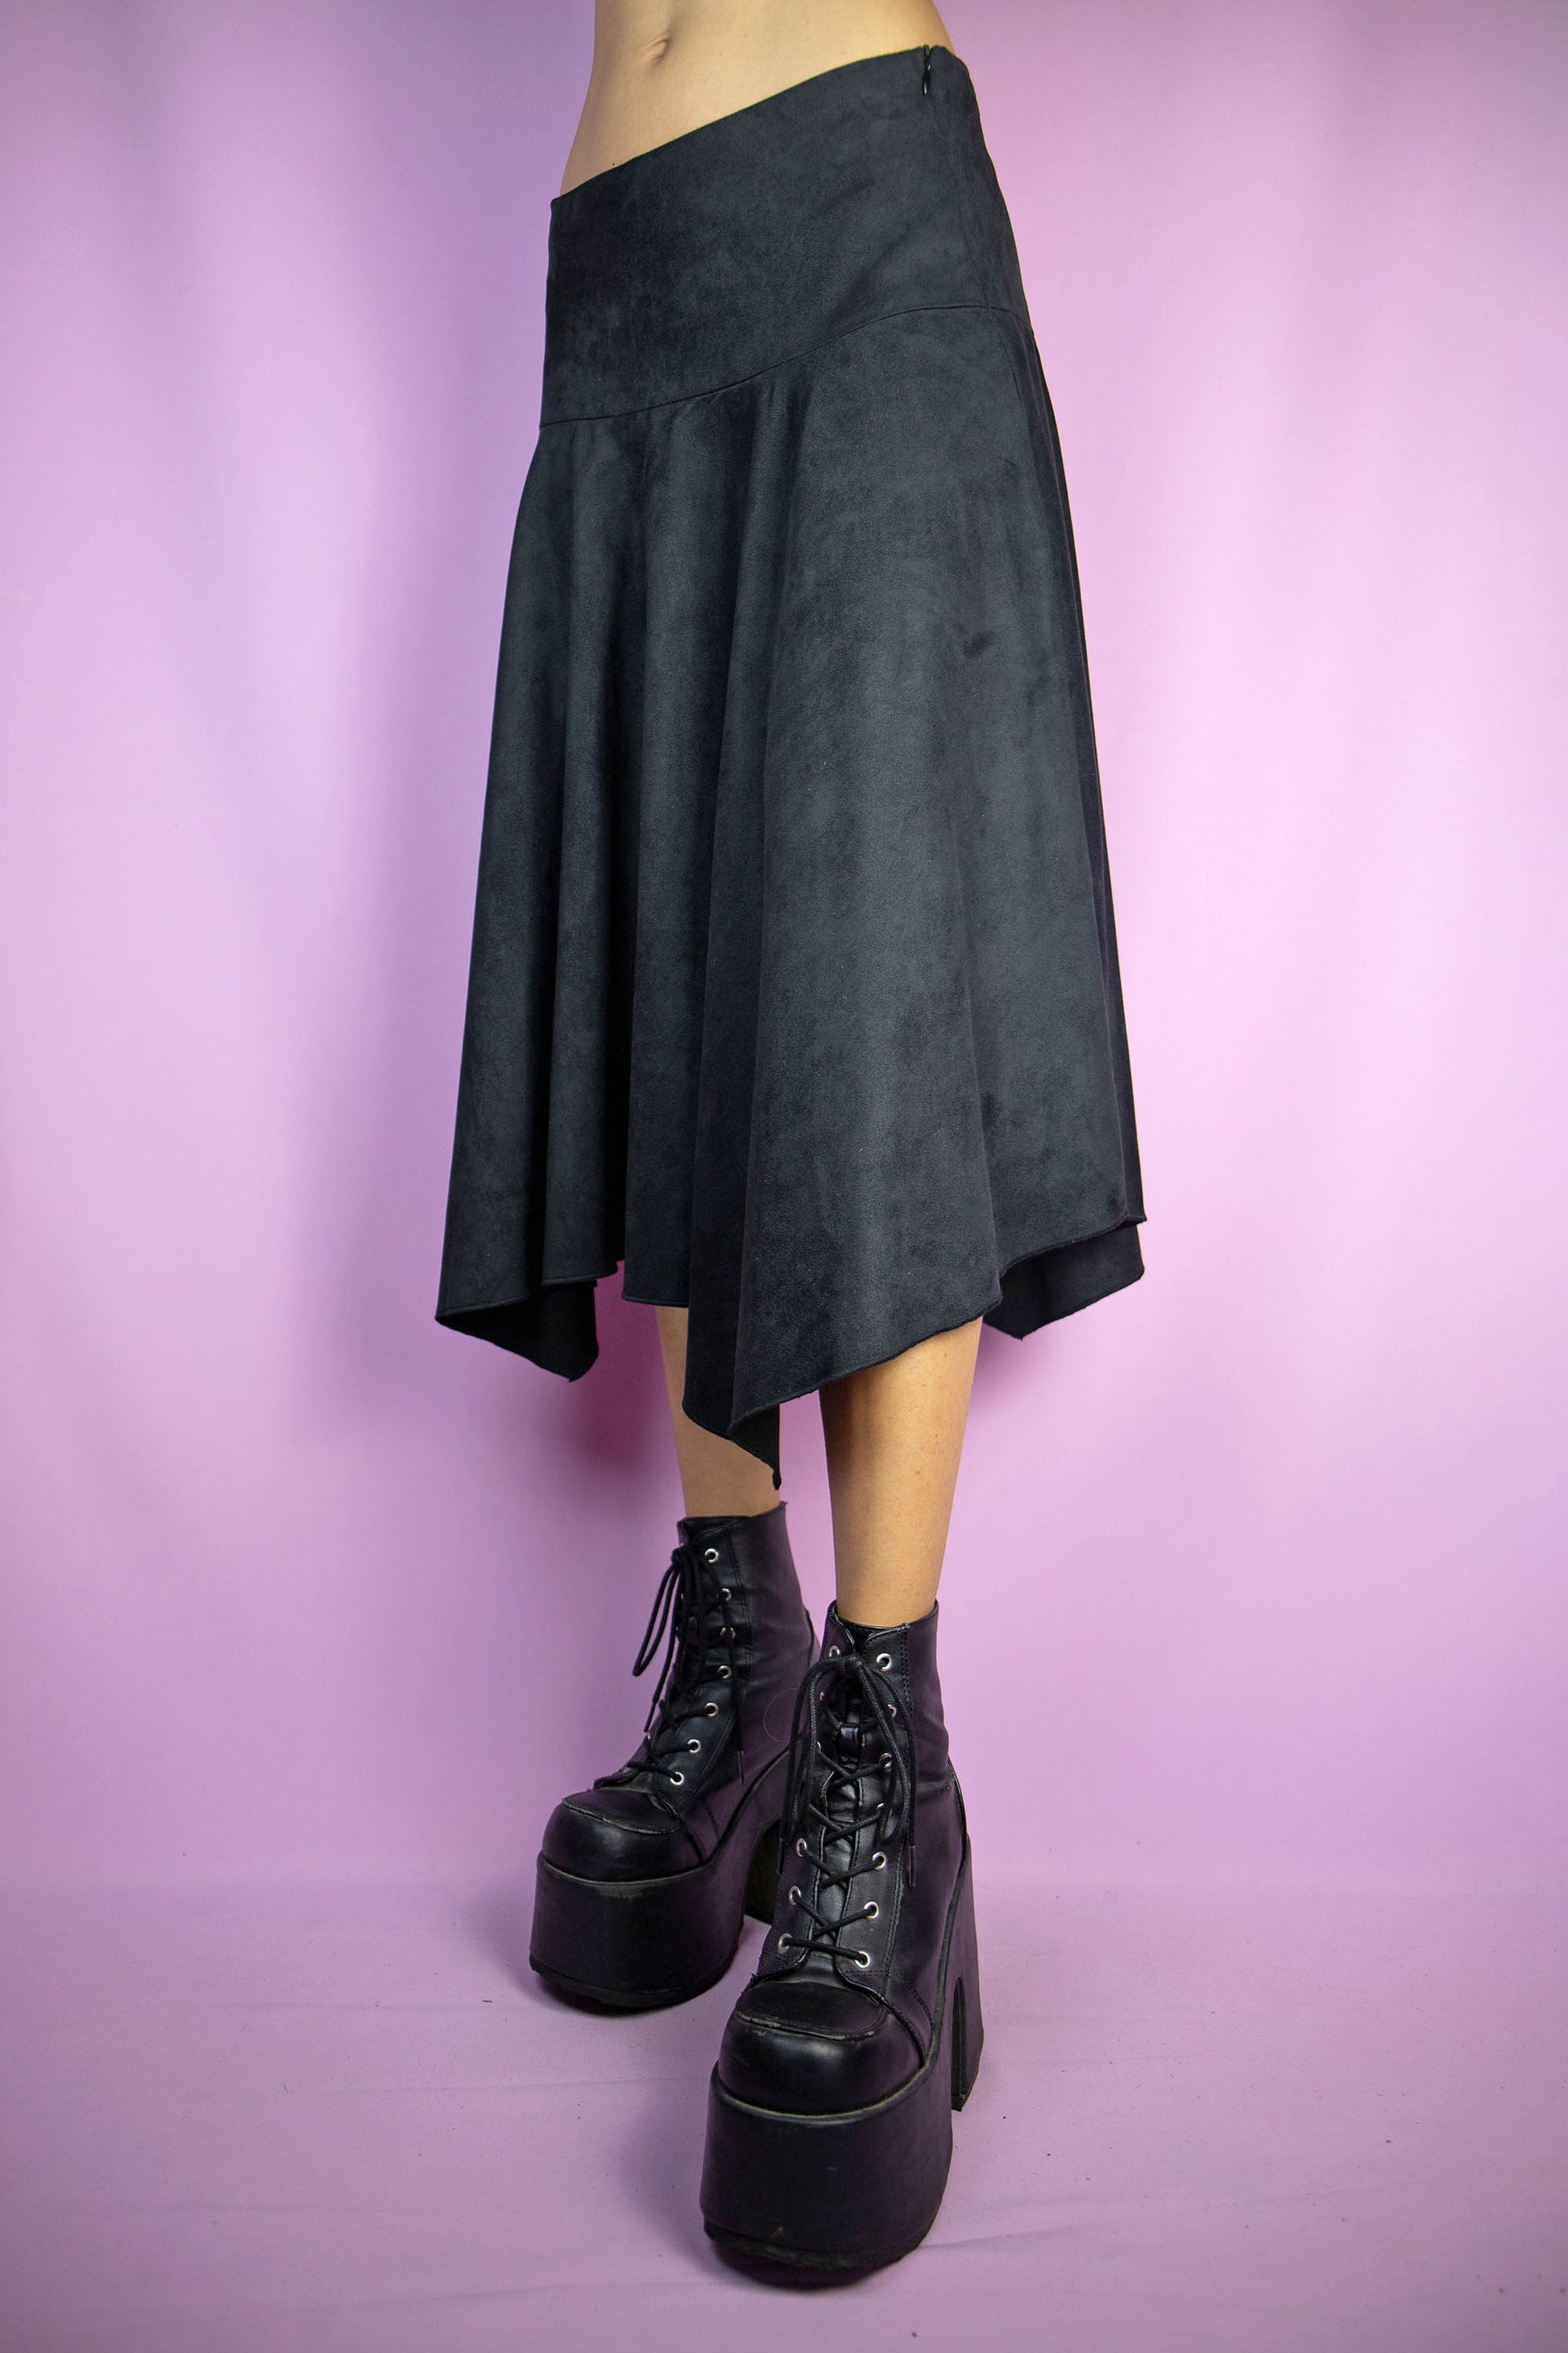 The Y2K Black Asymmetric Midi Skirt is a vintage faux suede skirt with an asymmetrical pointed hem and side zipper closure. Cyber fairy goth 2000s subversive handkerchief midi skirt. Excellent vintage condition.